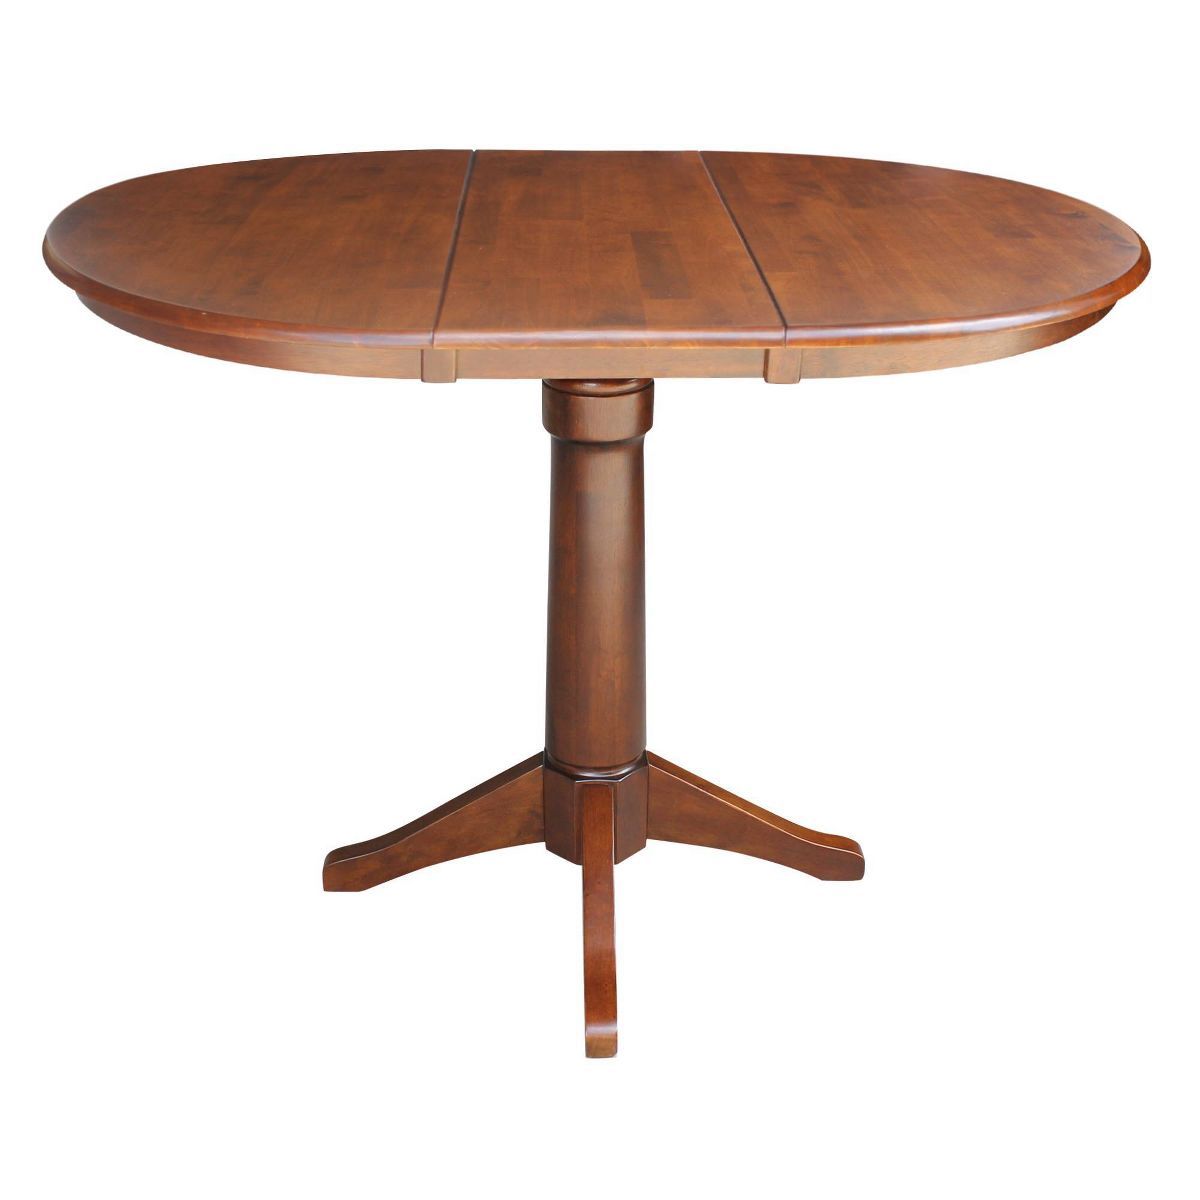 36" Magnolia Round Top Counter Height Dining Table with 12" Leaf - International Concepts | Target